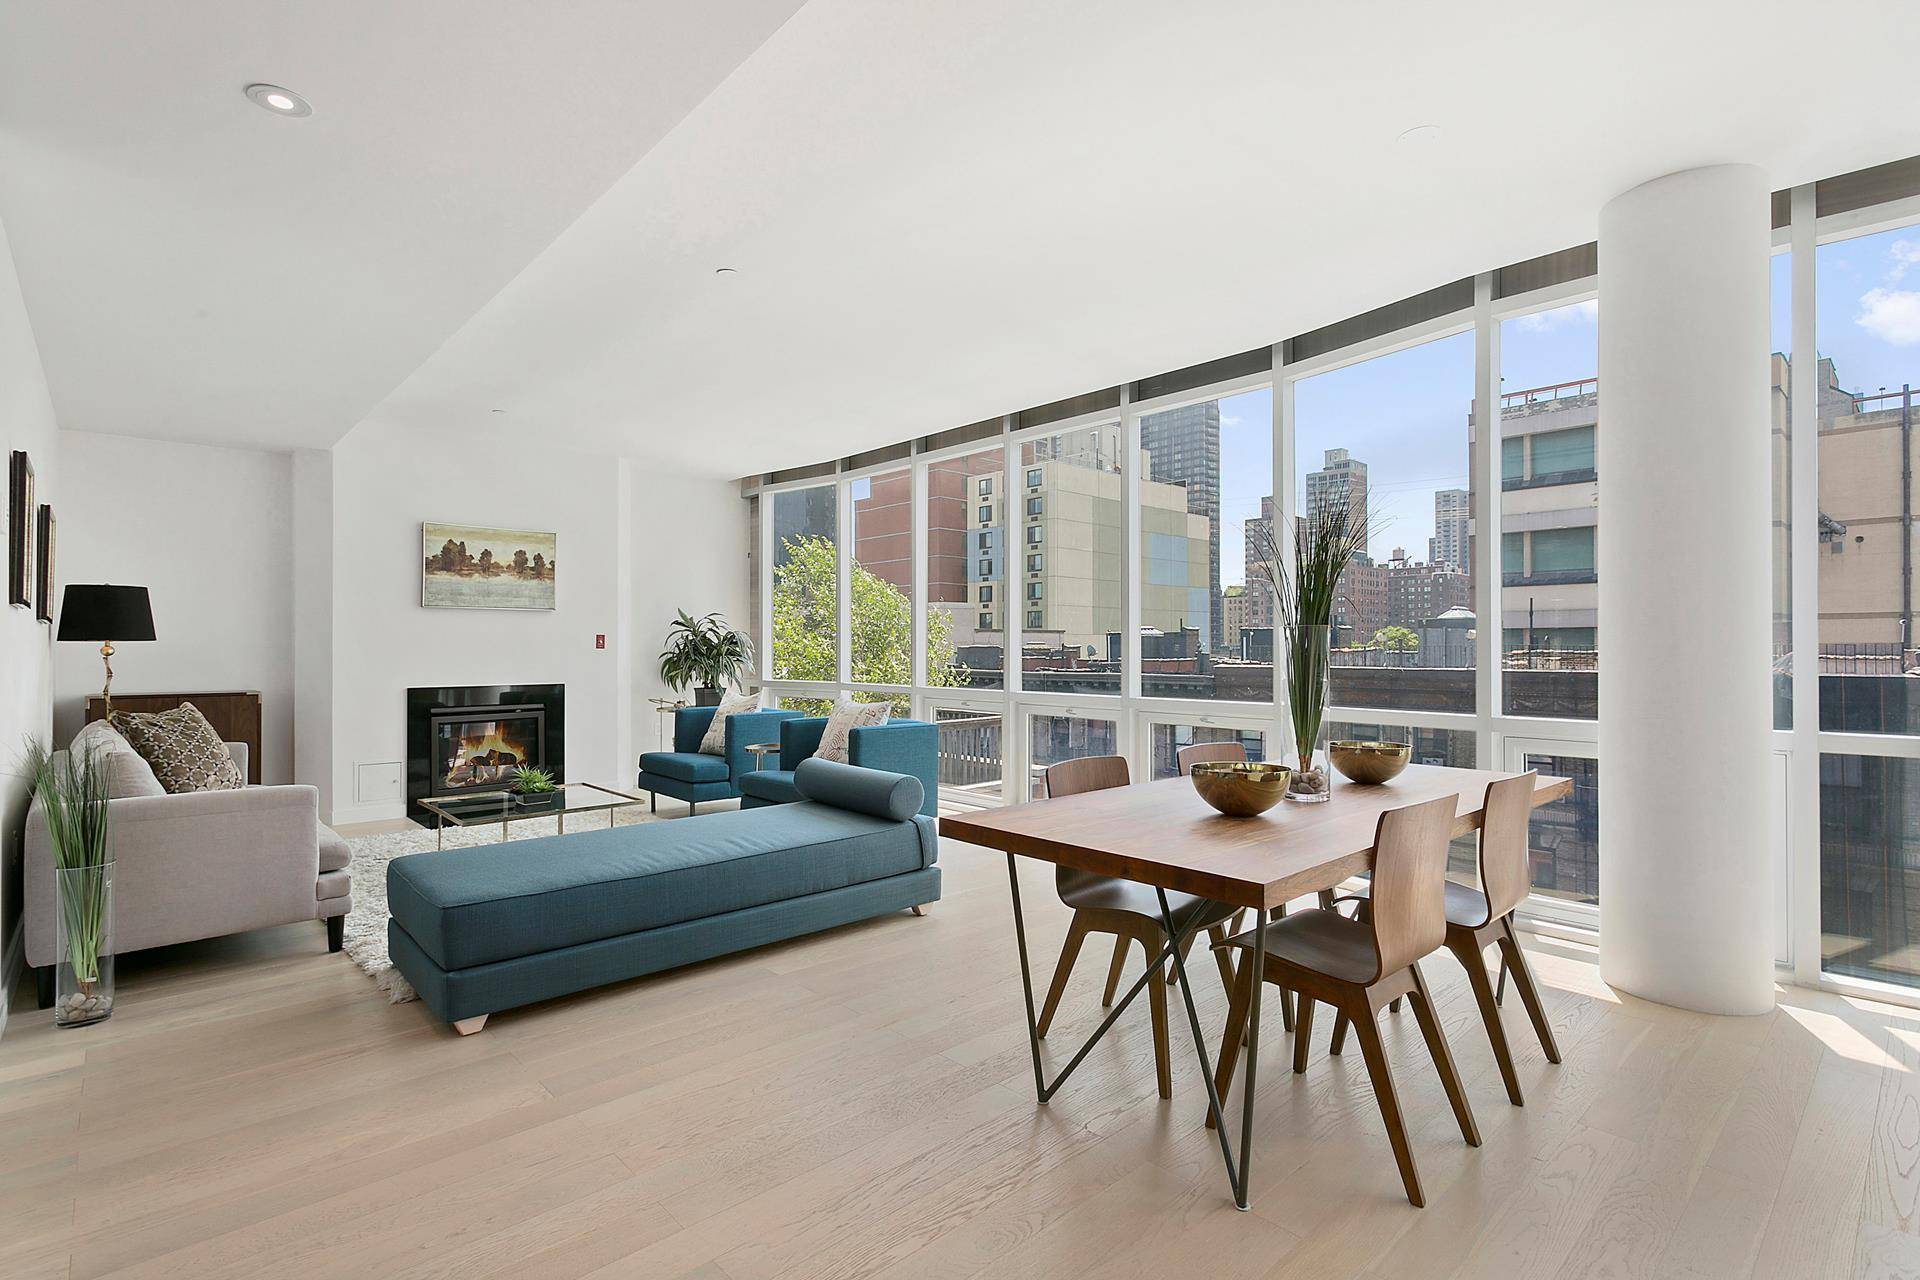 Apartment 7B is a beautiful floor through 1, 295 SF two bedroom and two full bathroom residence featuring an expansive terrace and a private rooftop totaling 669 SF.